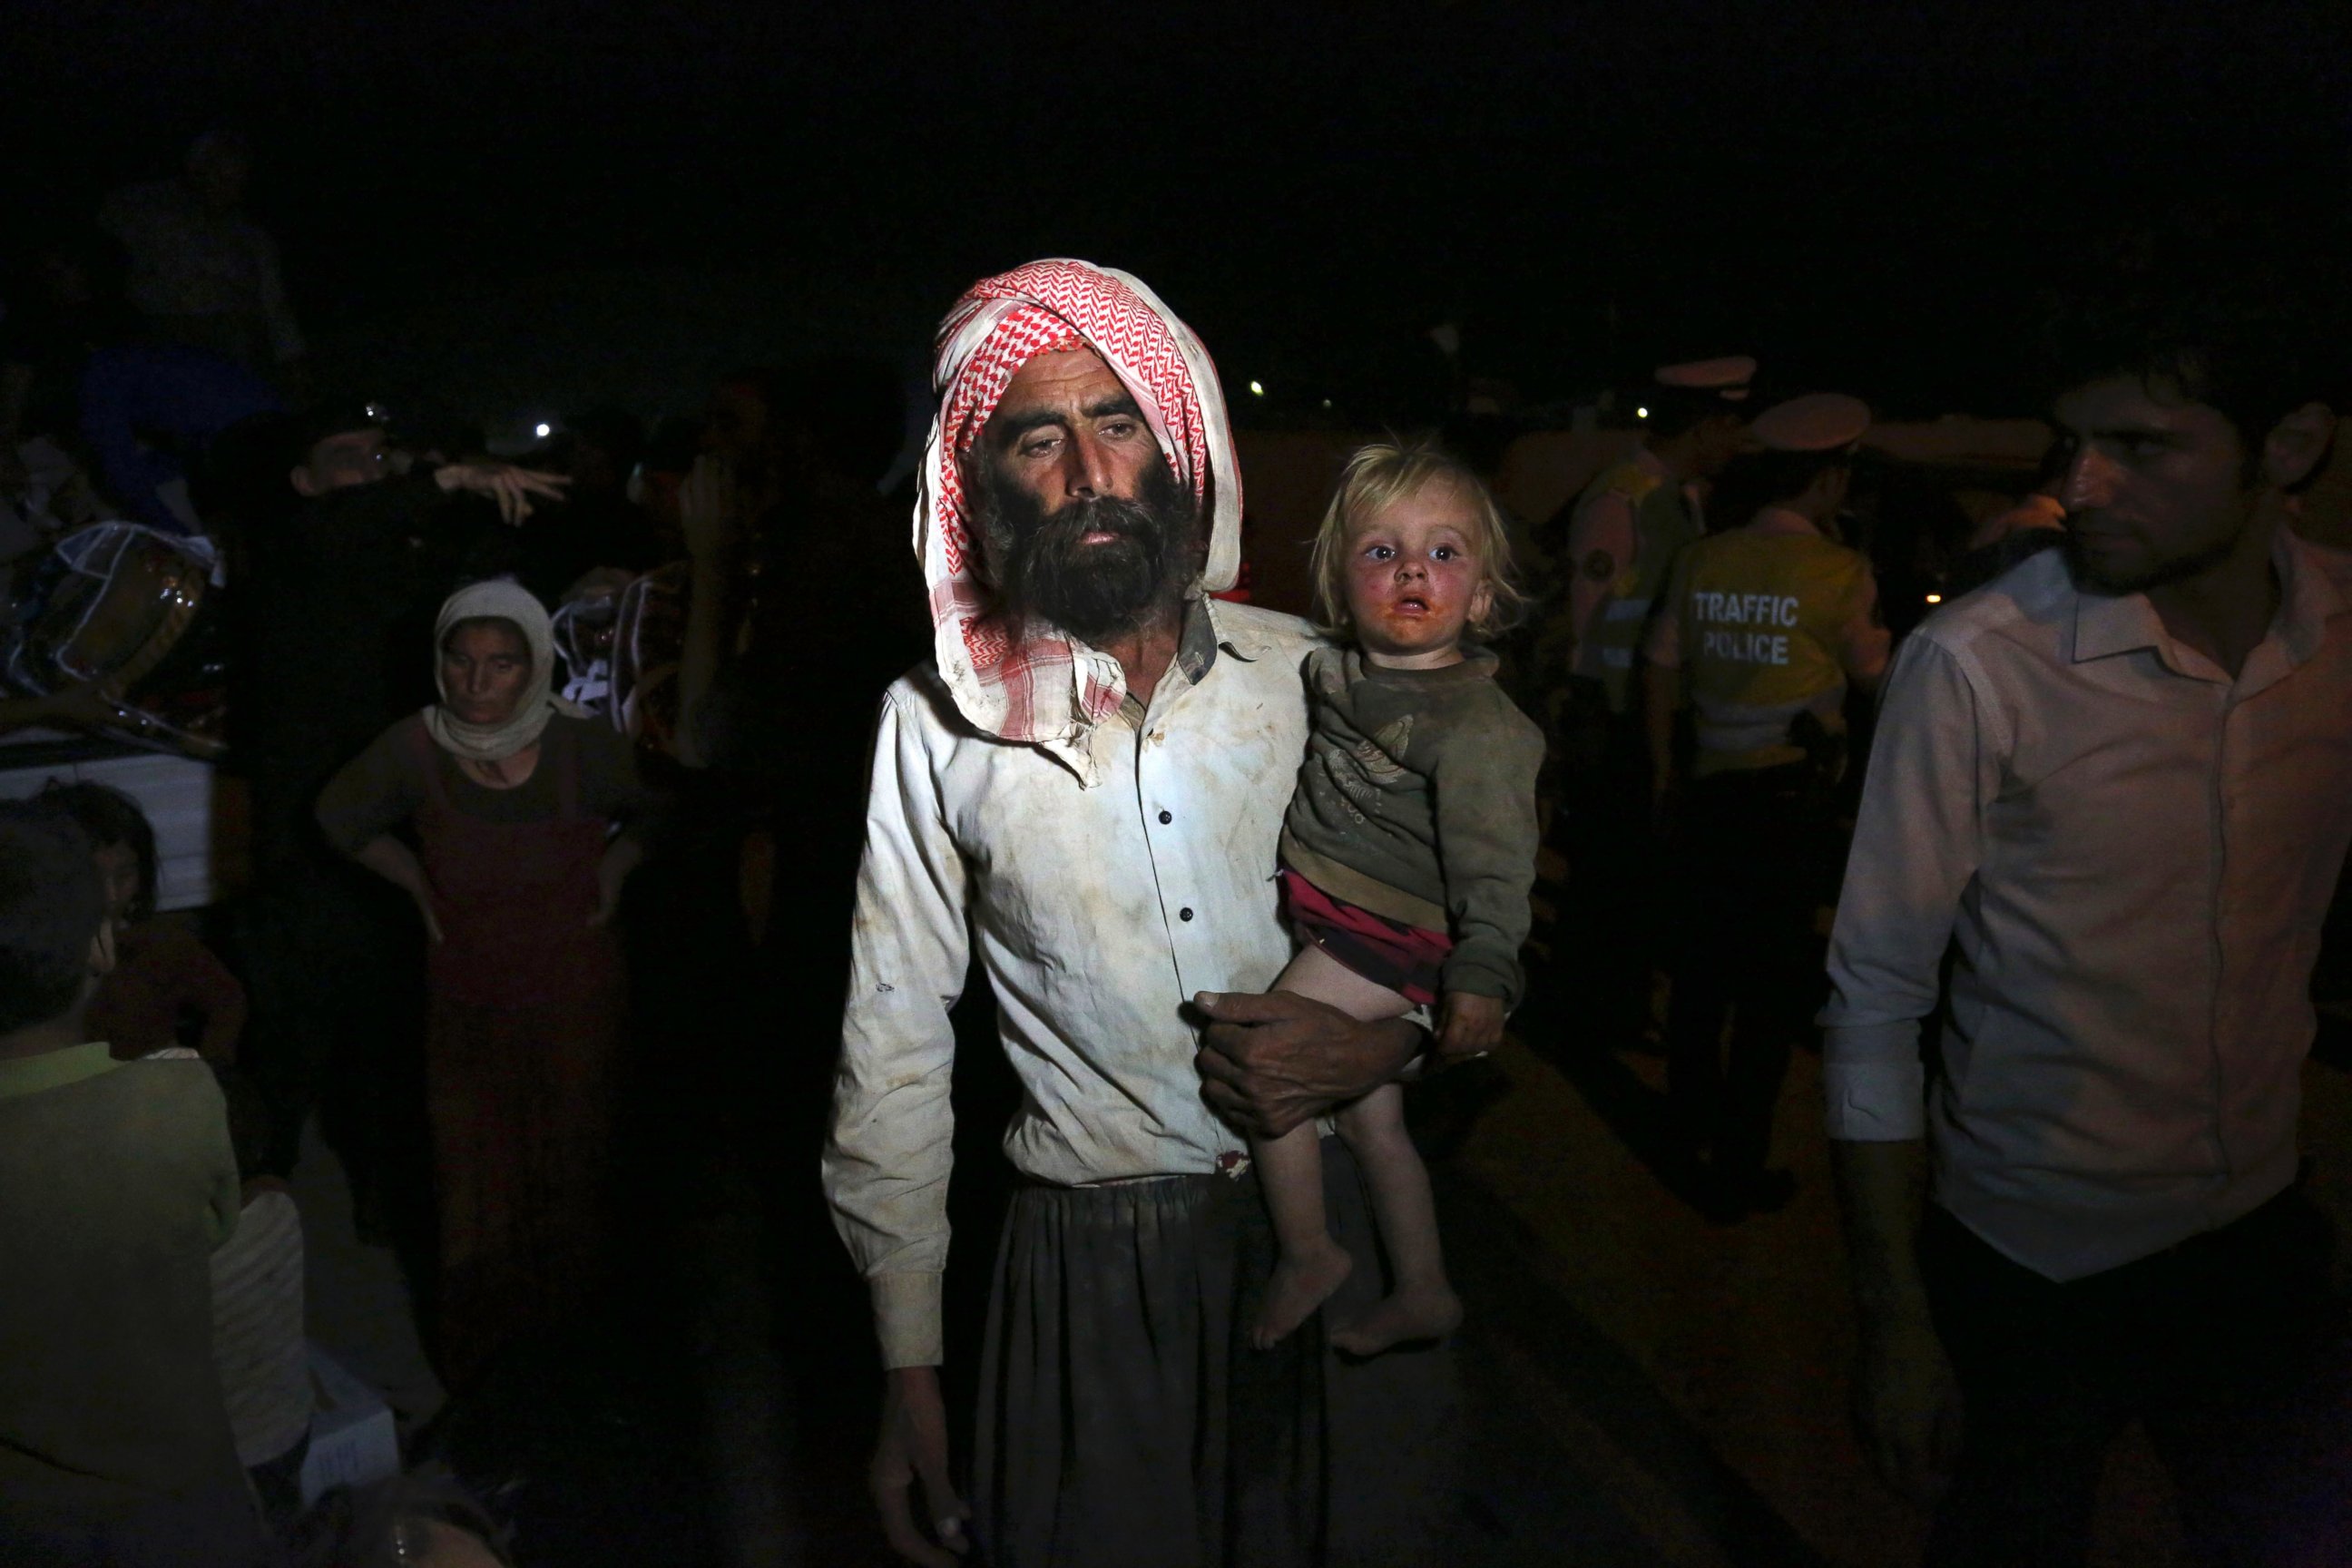 PHOTO: Displaced Iraqis from the Yazidi community cross the Syria-Iraq border at Feeshkhabour border point, in northern Iraq, Aug. 10, 2014.